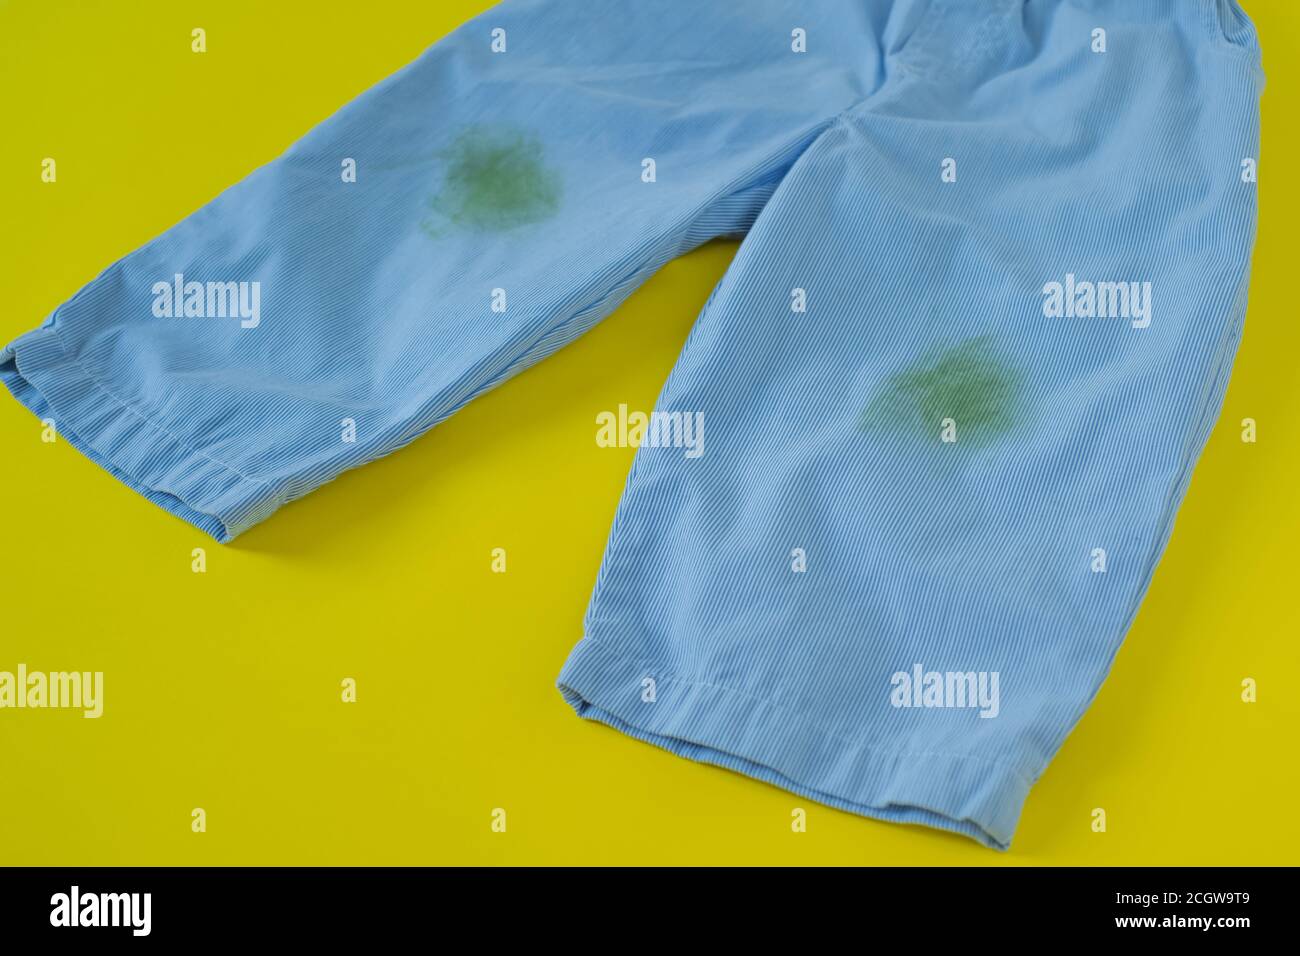 grass stains on pants.isolated on yellow background Stock Photo